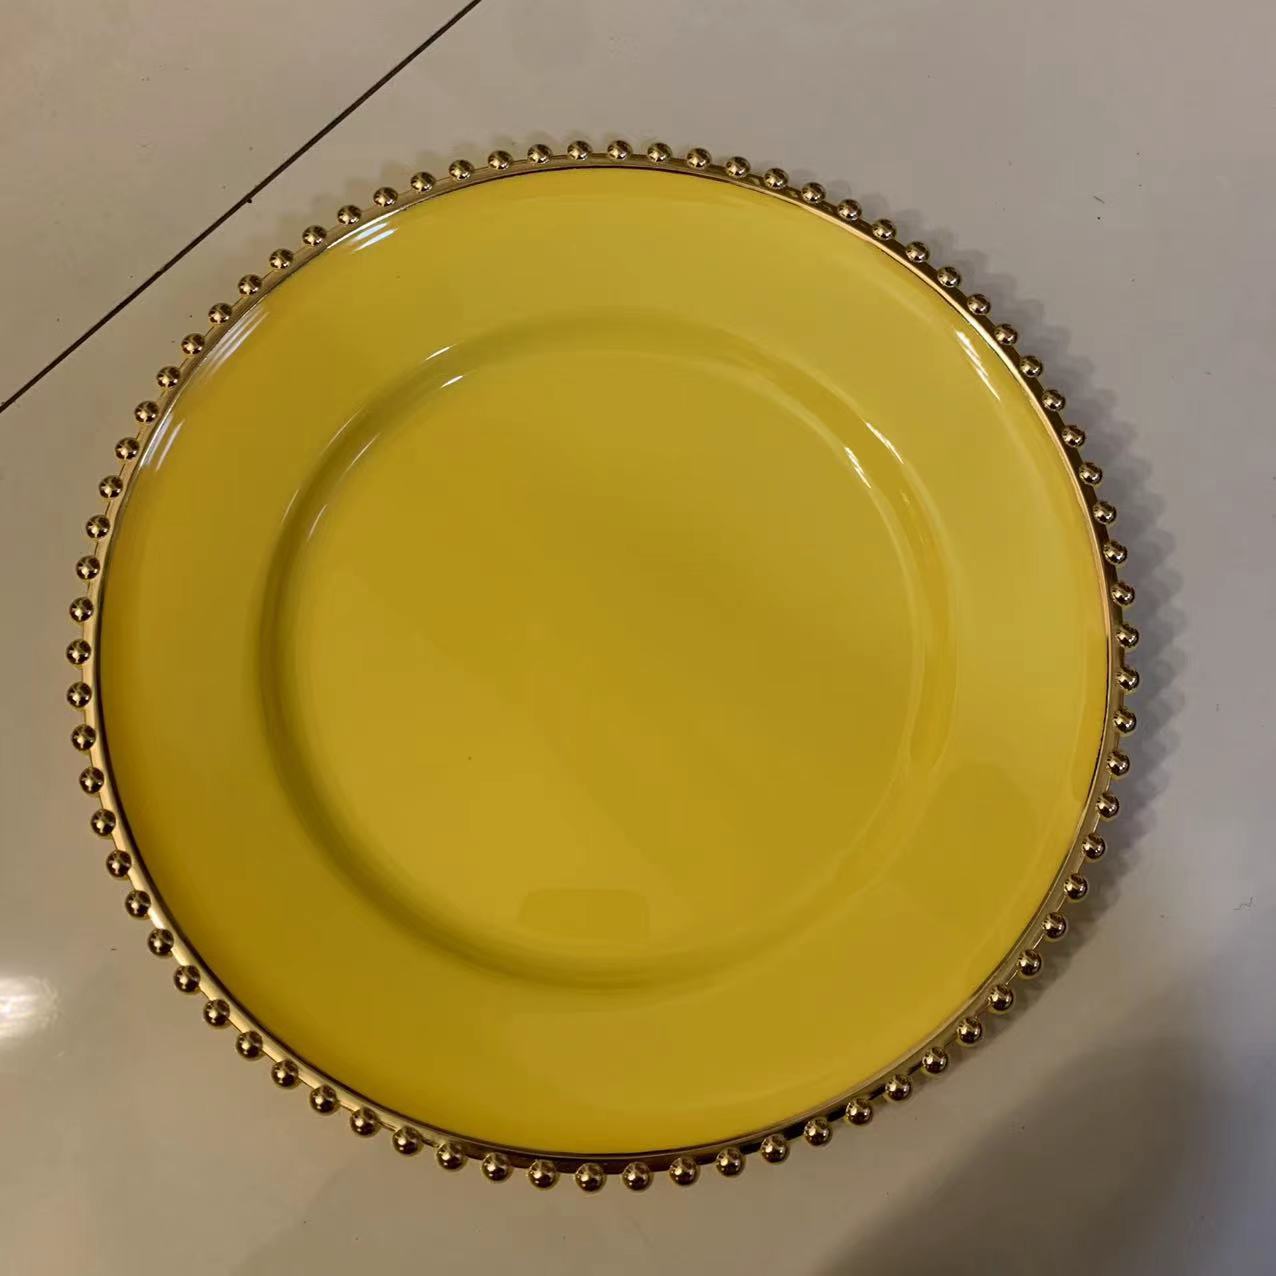 13inch Round plastic Rim Charger Plates Gold Round Reef plastic Charger Plates for Dinner,Wedding,Party,Event Decoration.